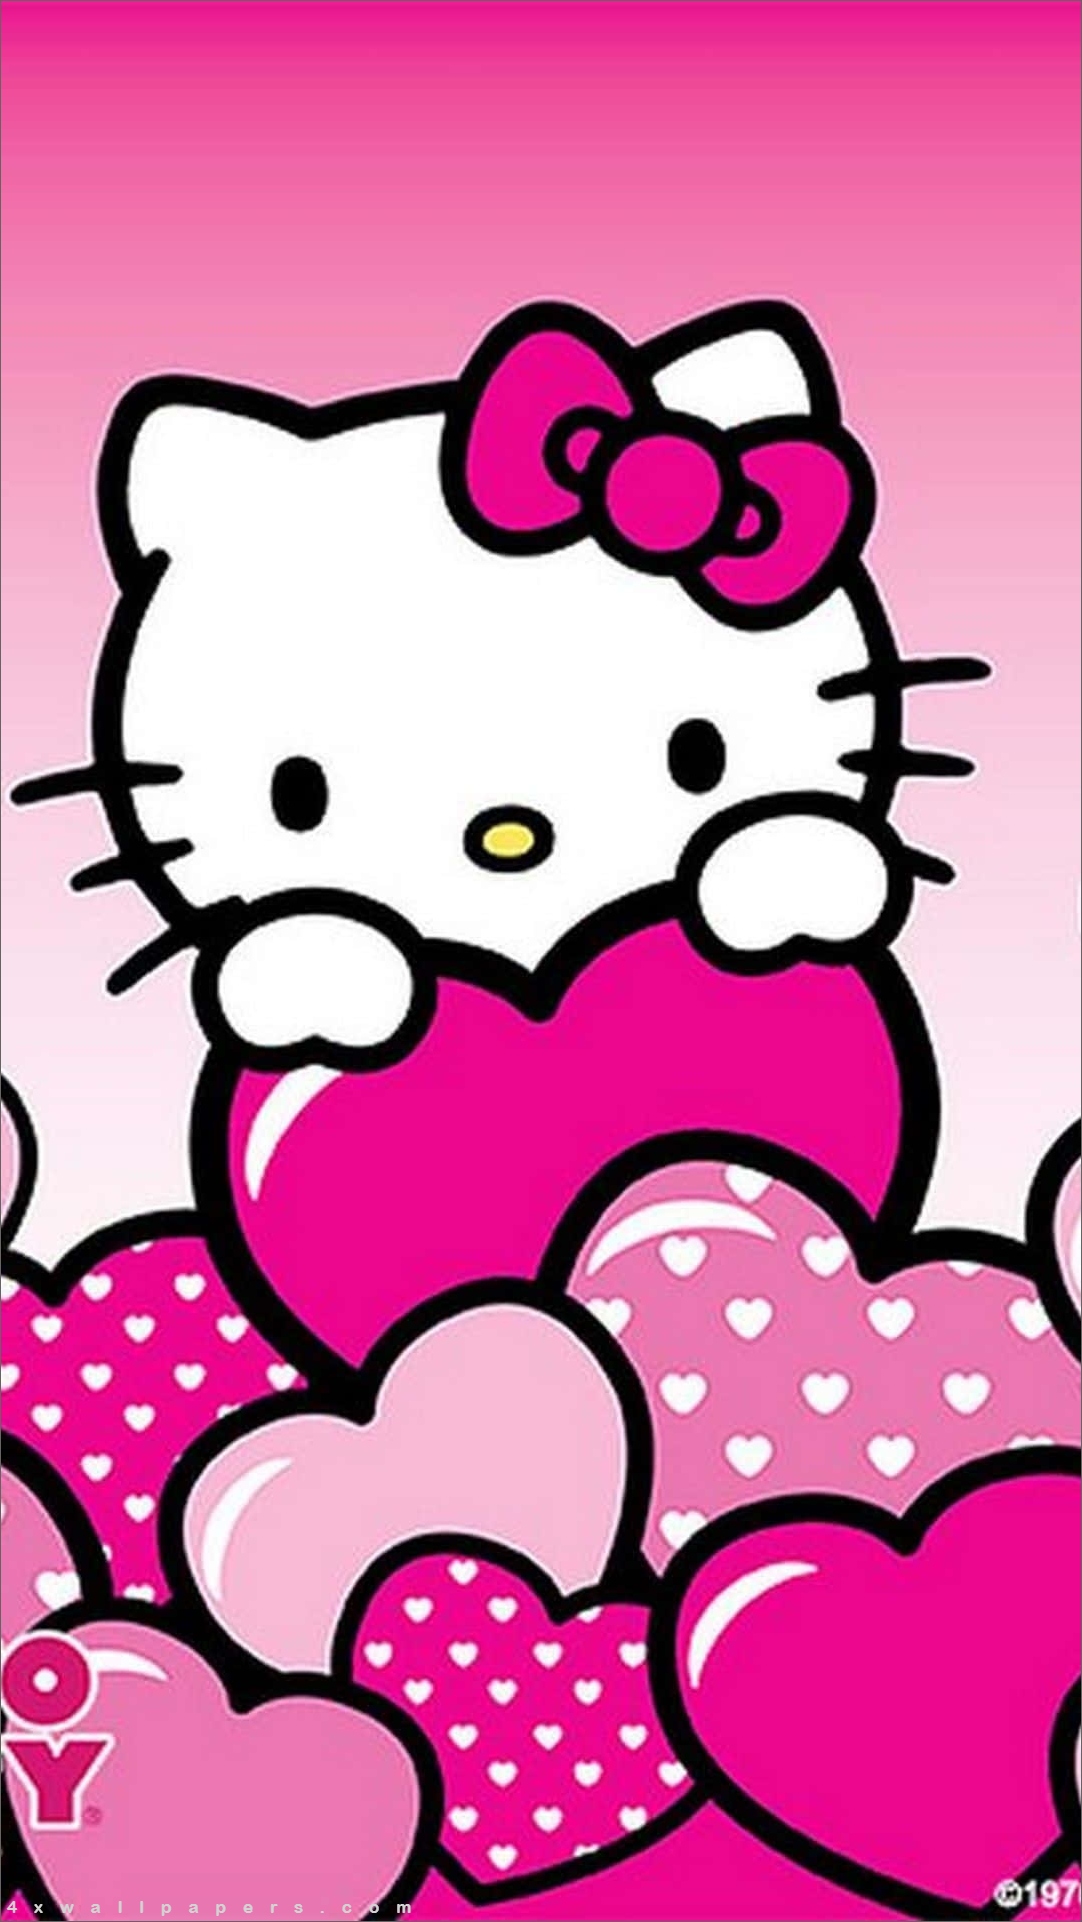 Free Download Wallpaper Iphone Hello Kitty 2019 3d Iphone Wallpaper 2BE | Hello  kitty wallpaper hd, Hello kitty wallpaper free, Hello kitty wallpaper